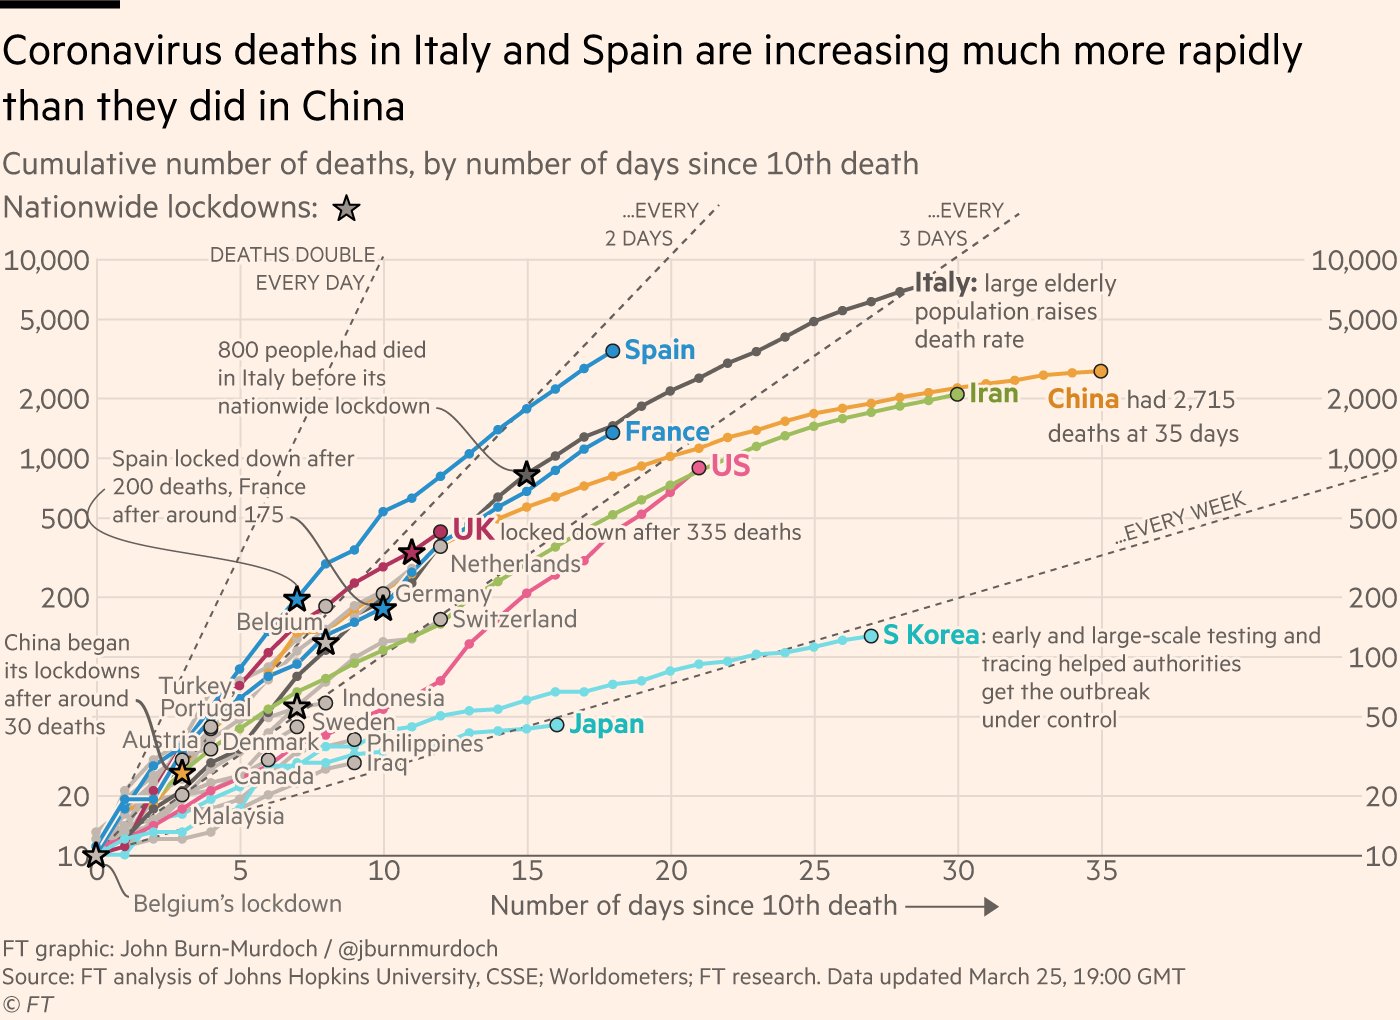 A line chart with daily Covid-19 deaths in different countries. The chart is using a logarithmic y axis